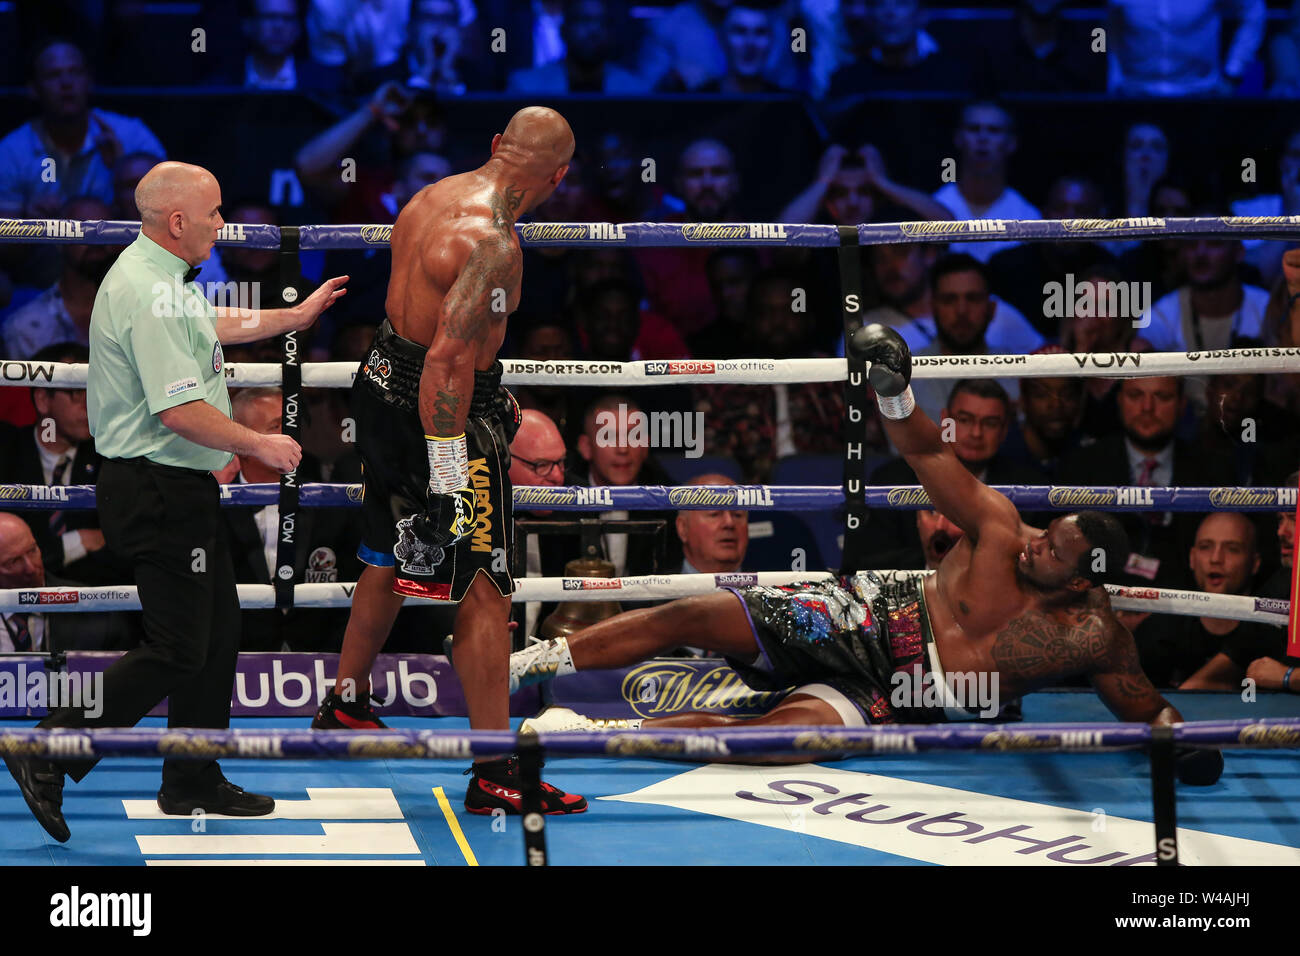 LONDON, ENGLAND - JULY 20: Dillian Whyte is knocked down by Oscar Rivas during the vacant WBC Interim Heavyweight contest during the Matchroom Boxing Stock Photo